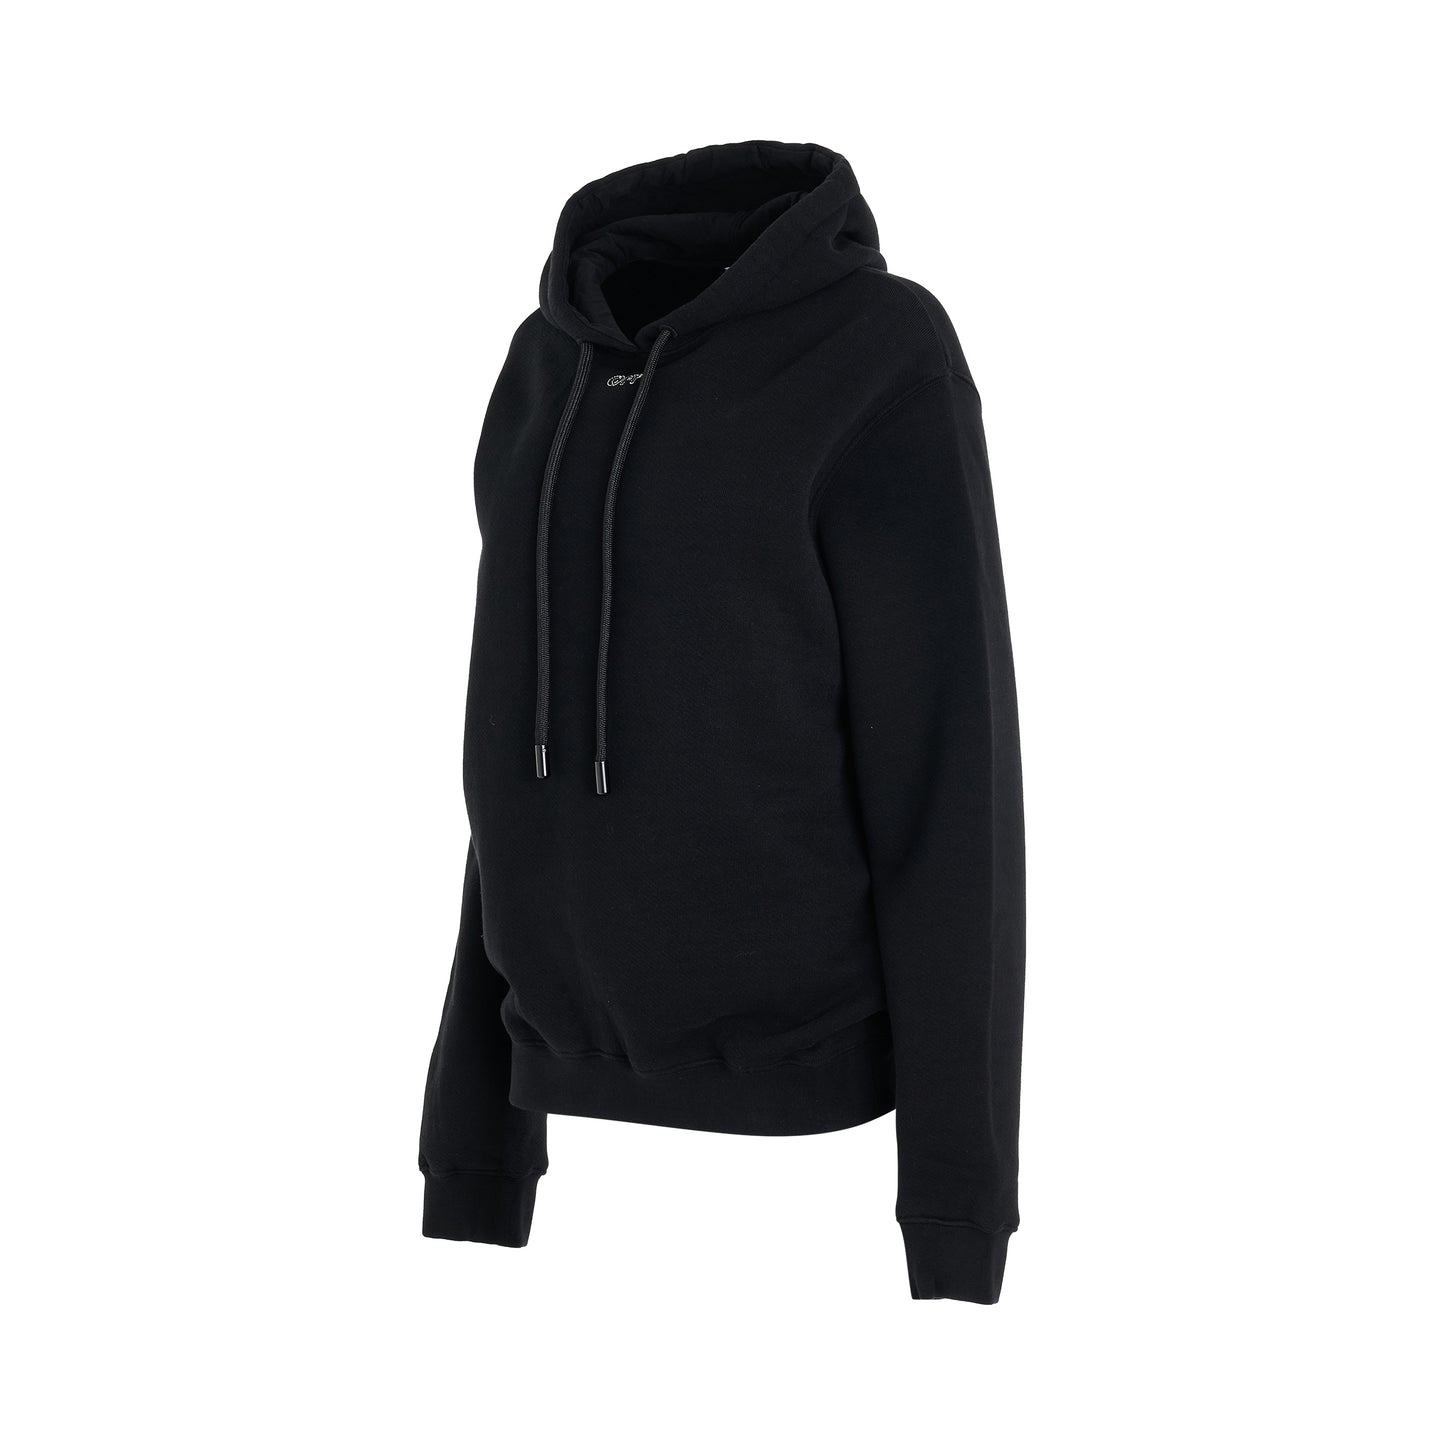 Embroidered Stitch Arrow Regular Fit Hoodie in Black